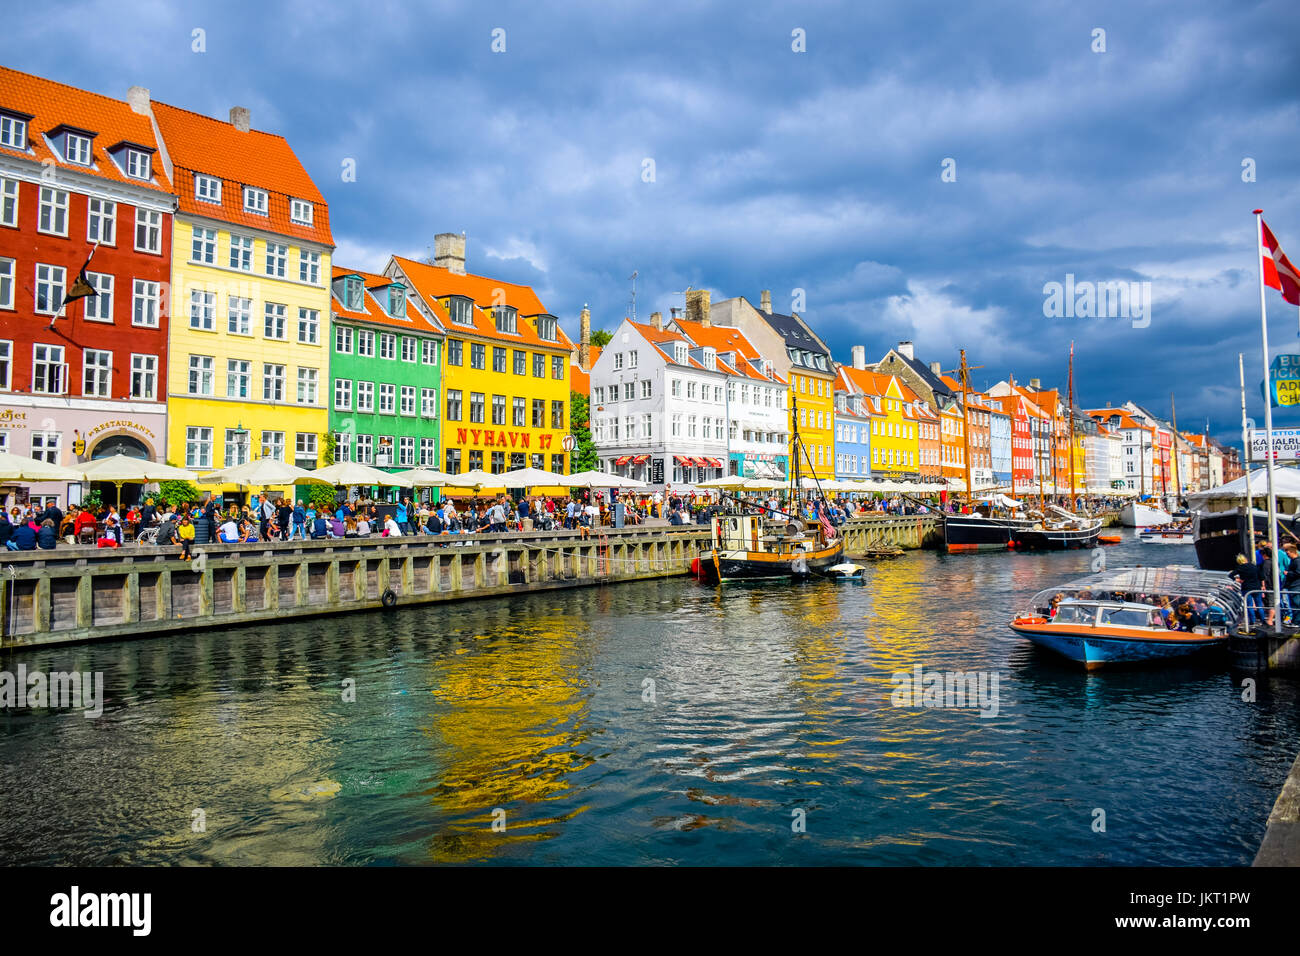 COPENHAGEN, DENMARK - JULY 20: Nyhavn, 17th century waterfront, canal and entertainment district and the popular tourist destination in Copenhagen Stock Photo